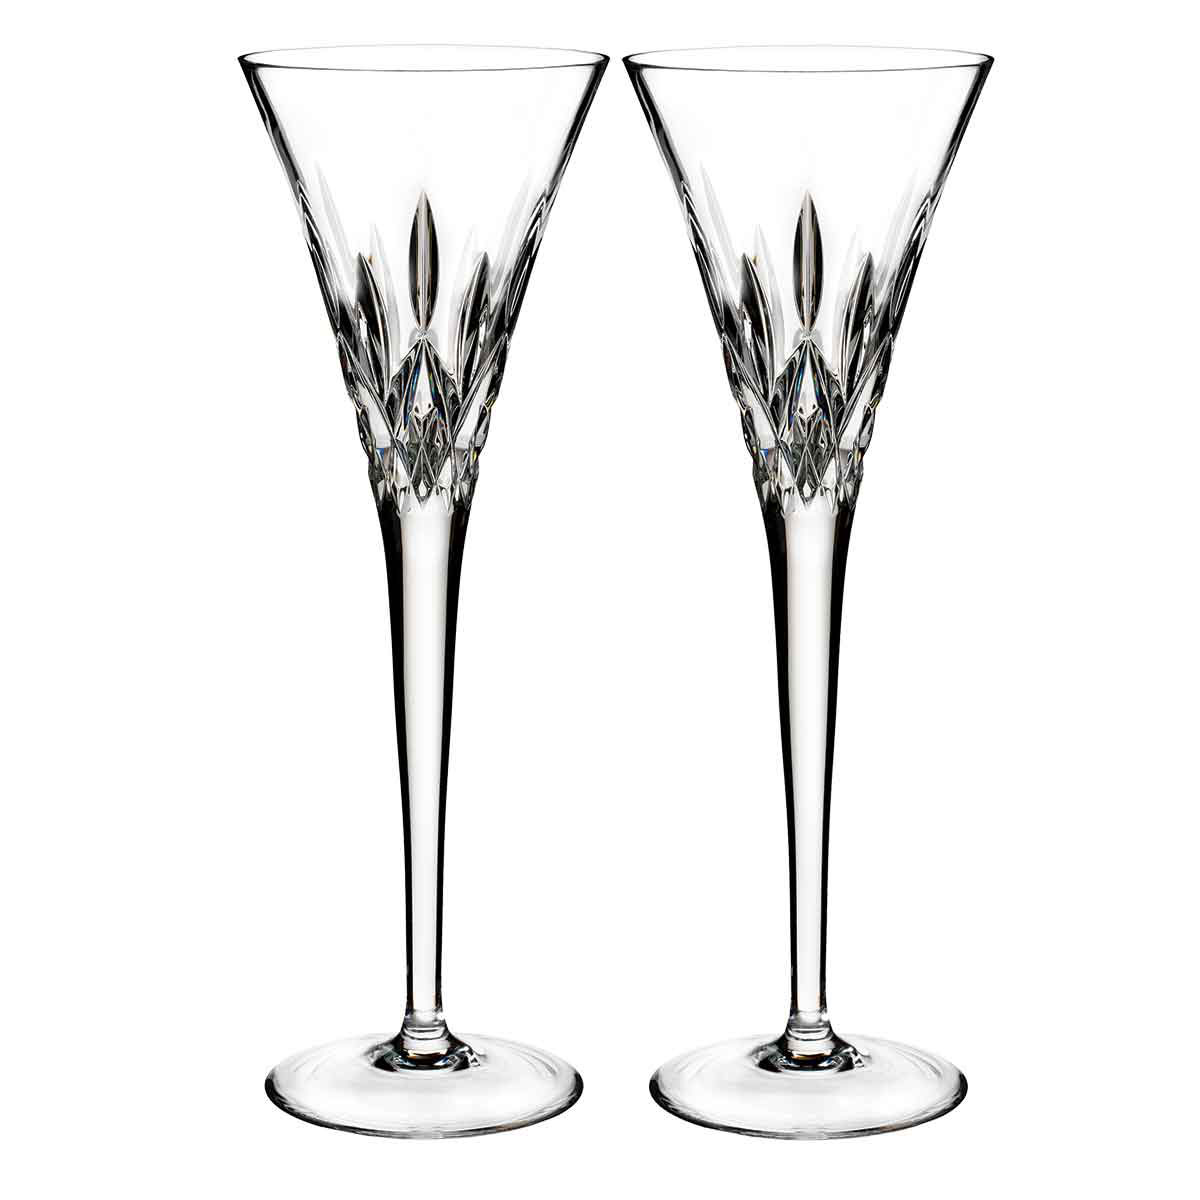 Waterford Lismore Pops Toasting Crystal Flutes, Pair